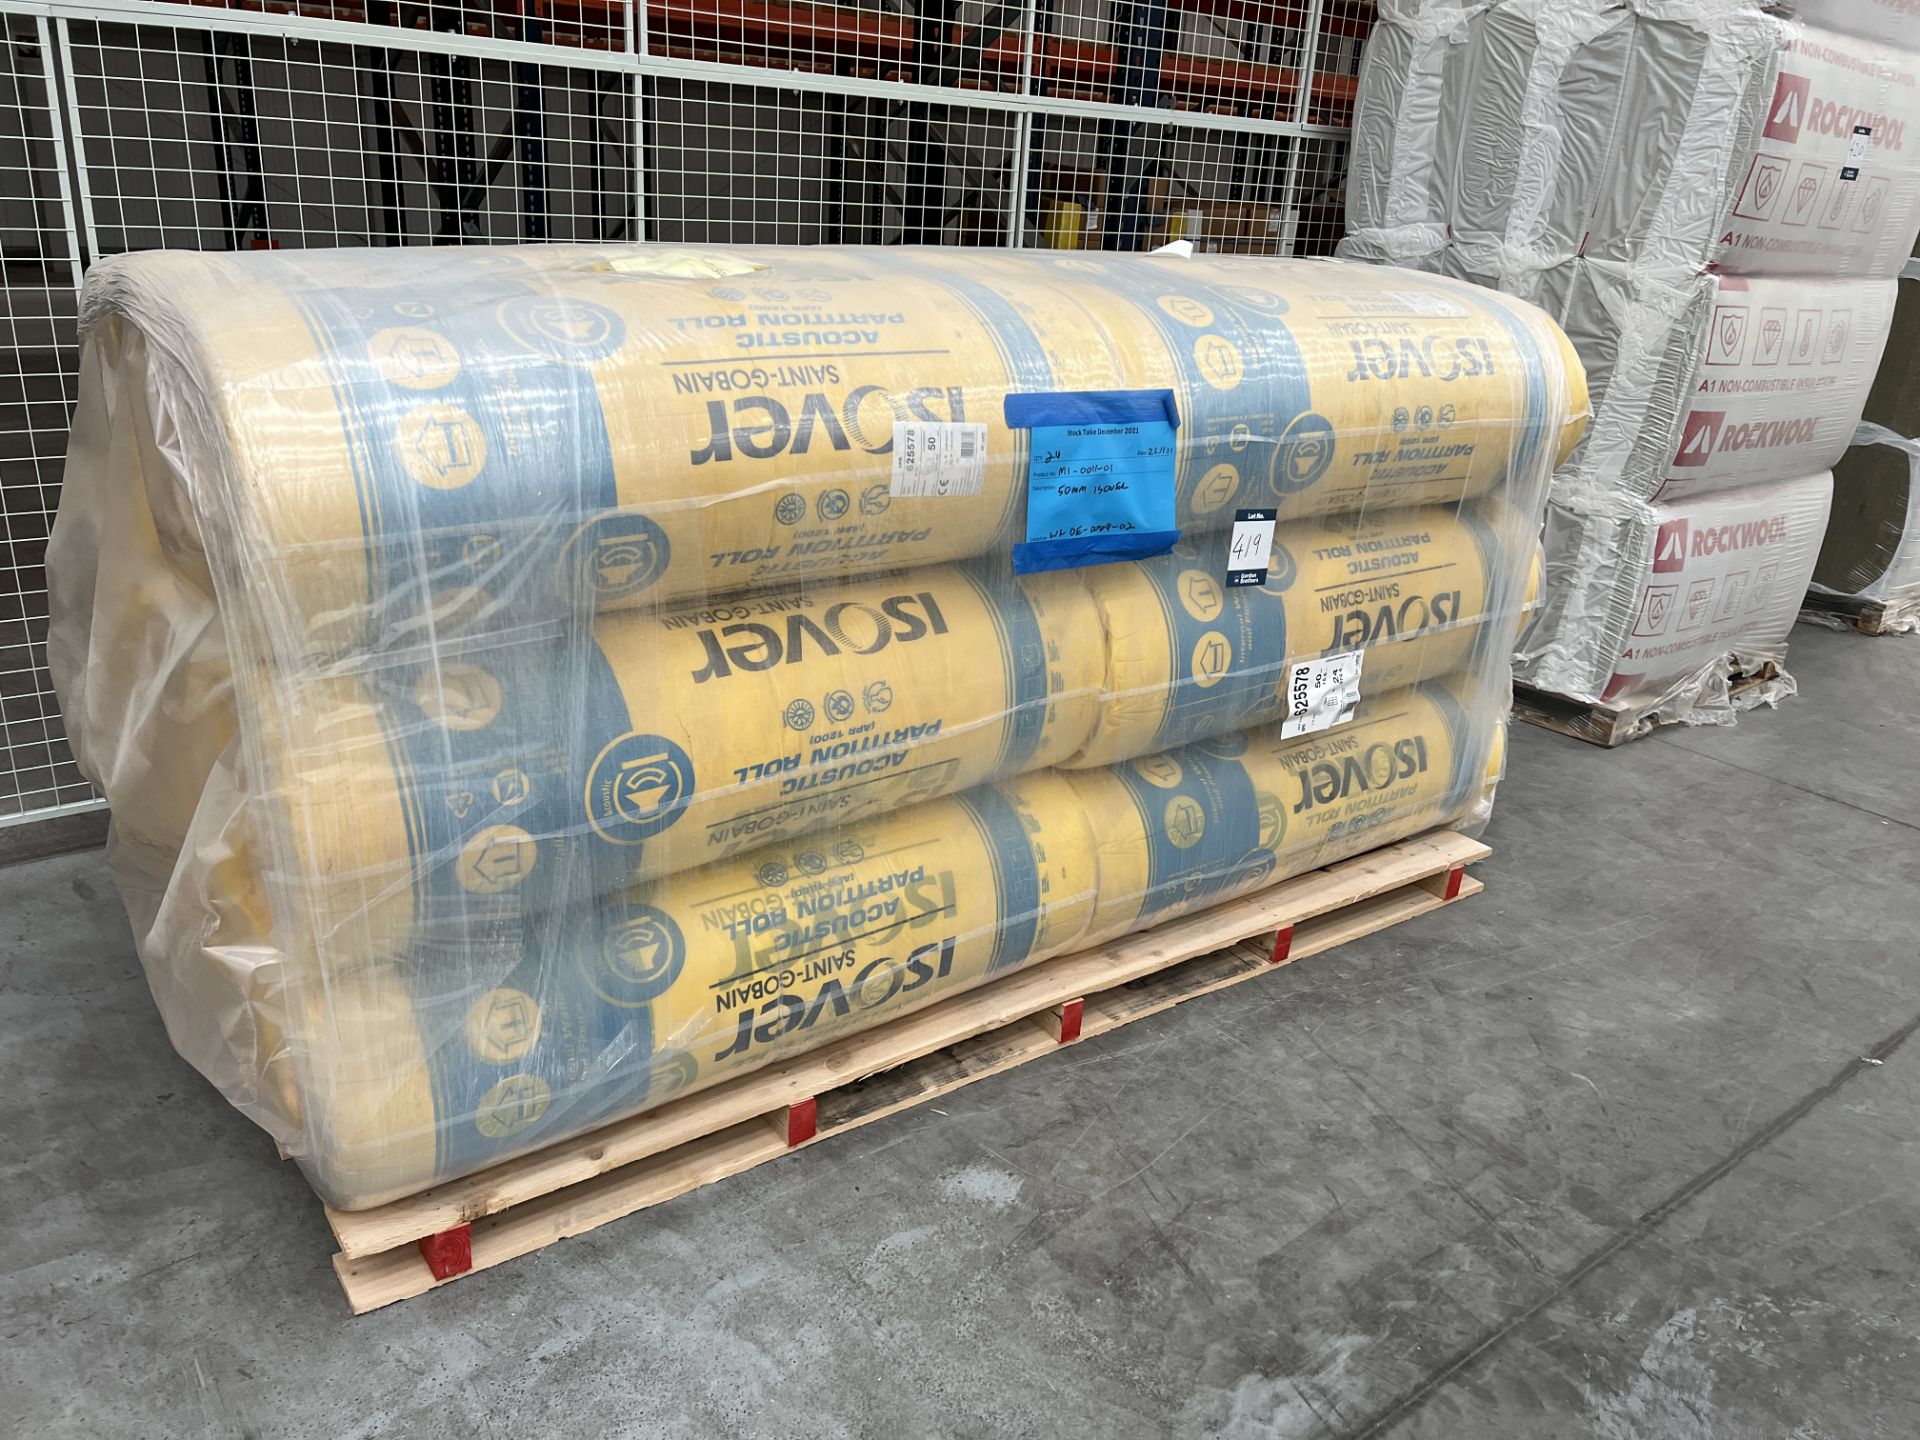 IS over APR ref 5200 acoustic partition glass mineral wool roll, 2 x 600mm x 13m x 50mm, 24 roll